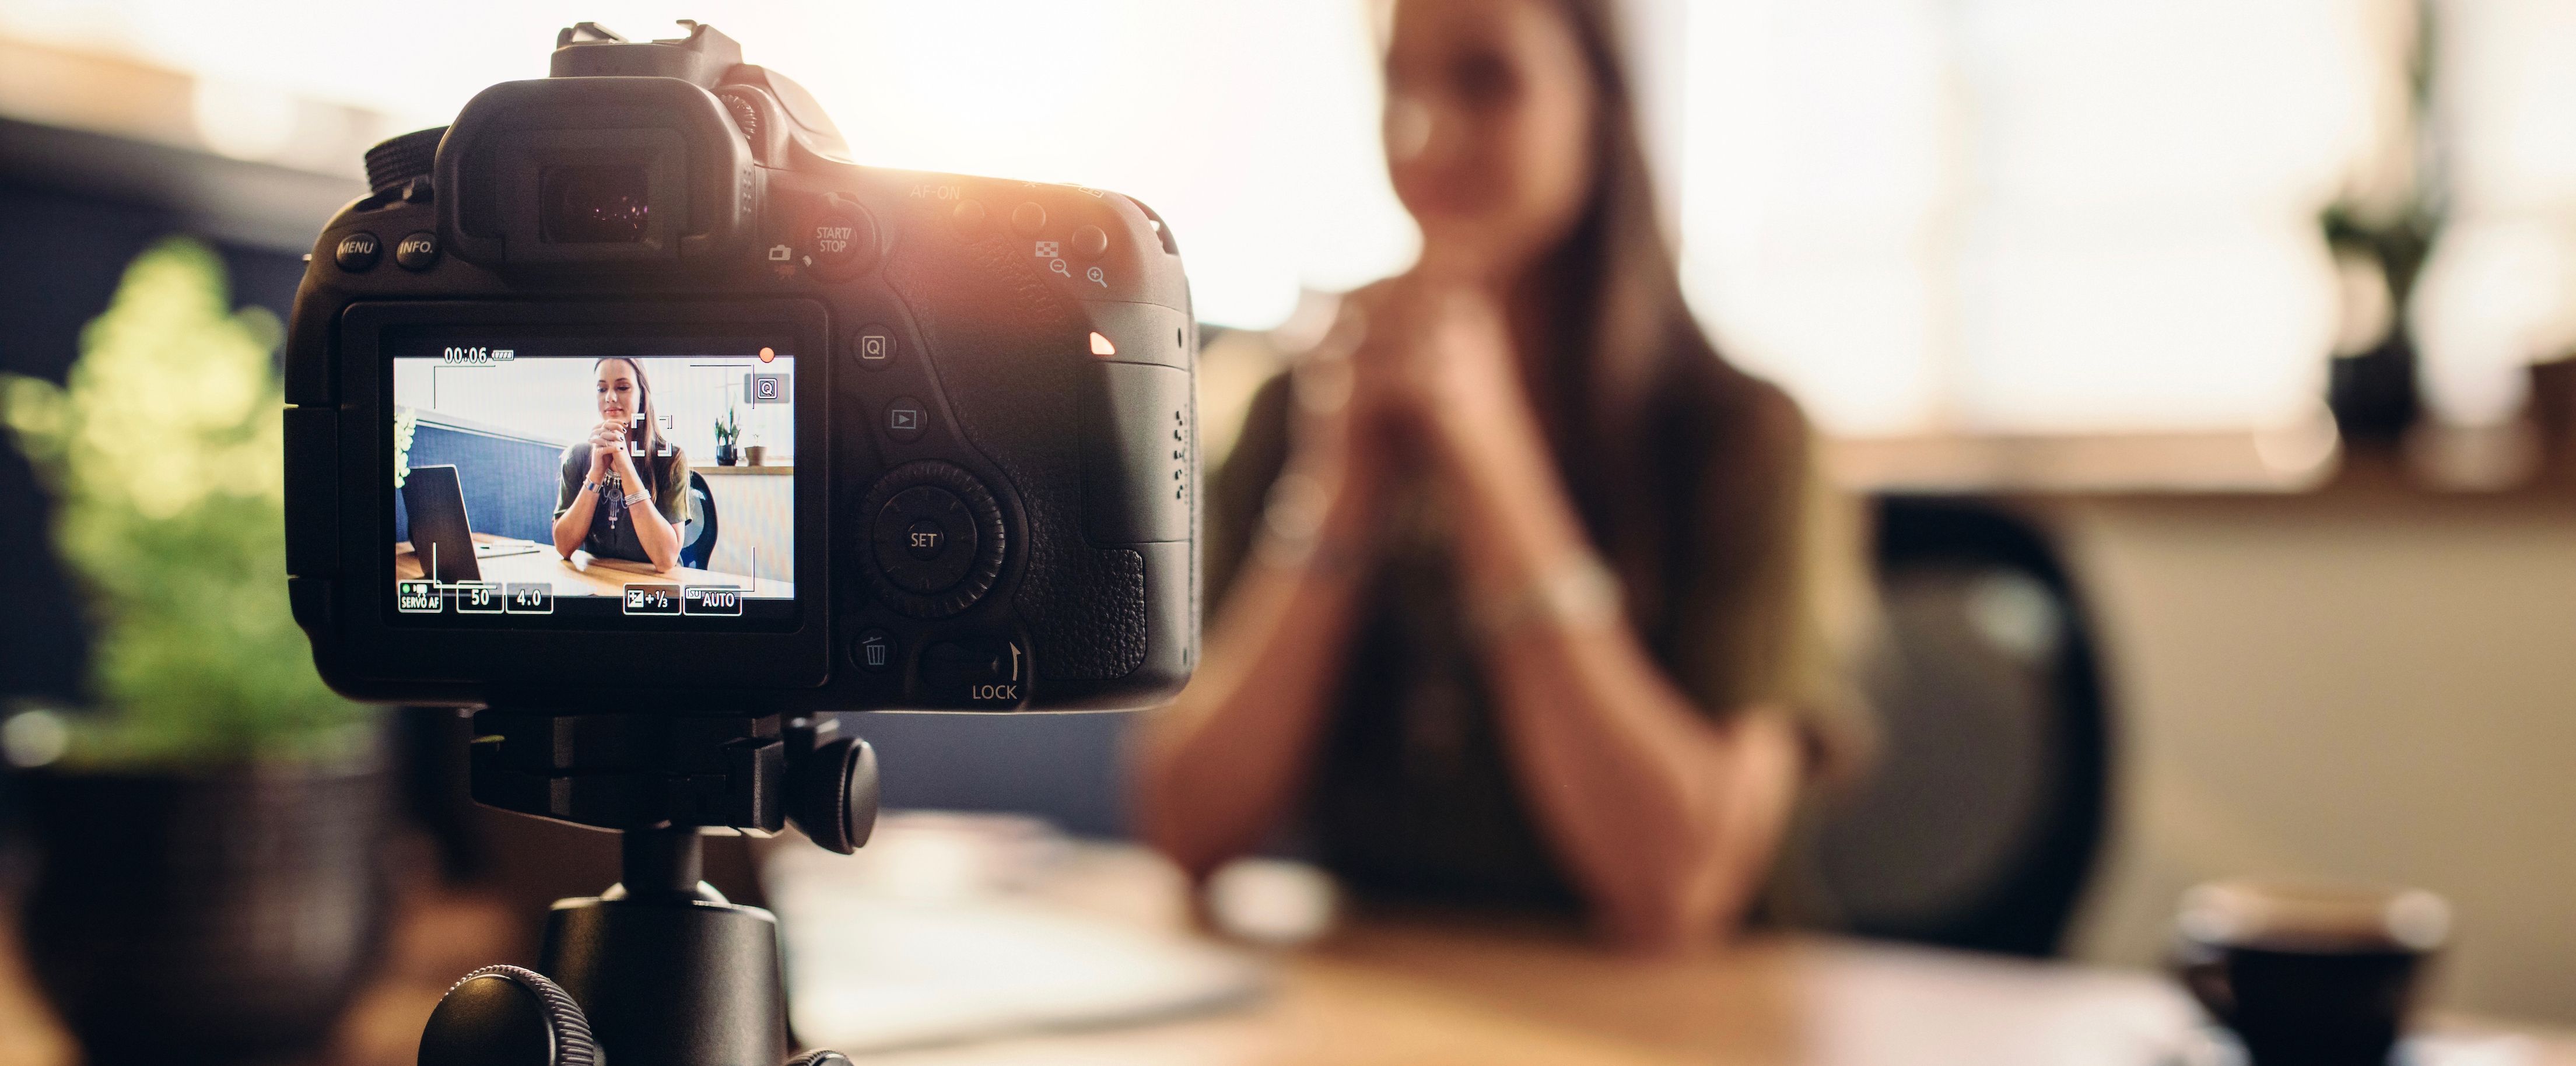 How We Increased Sales Opportunities 4X With Video: A HubSpot Experiment